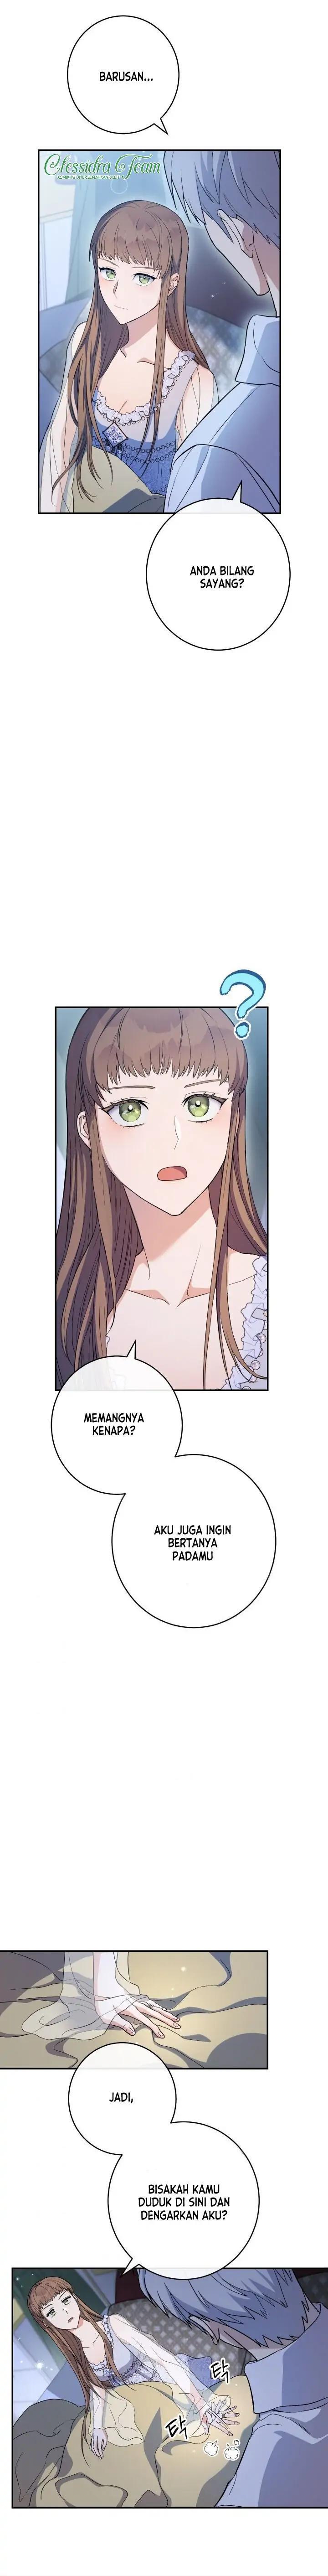 Marriage of Convenience Chapter 15